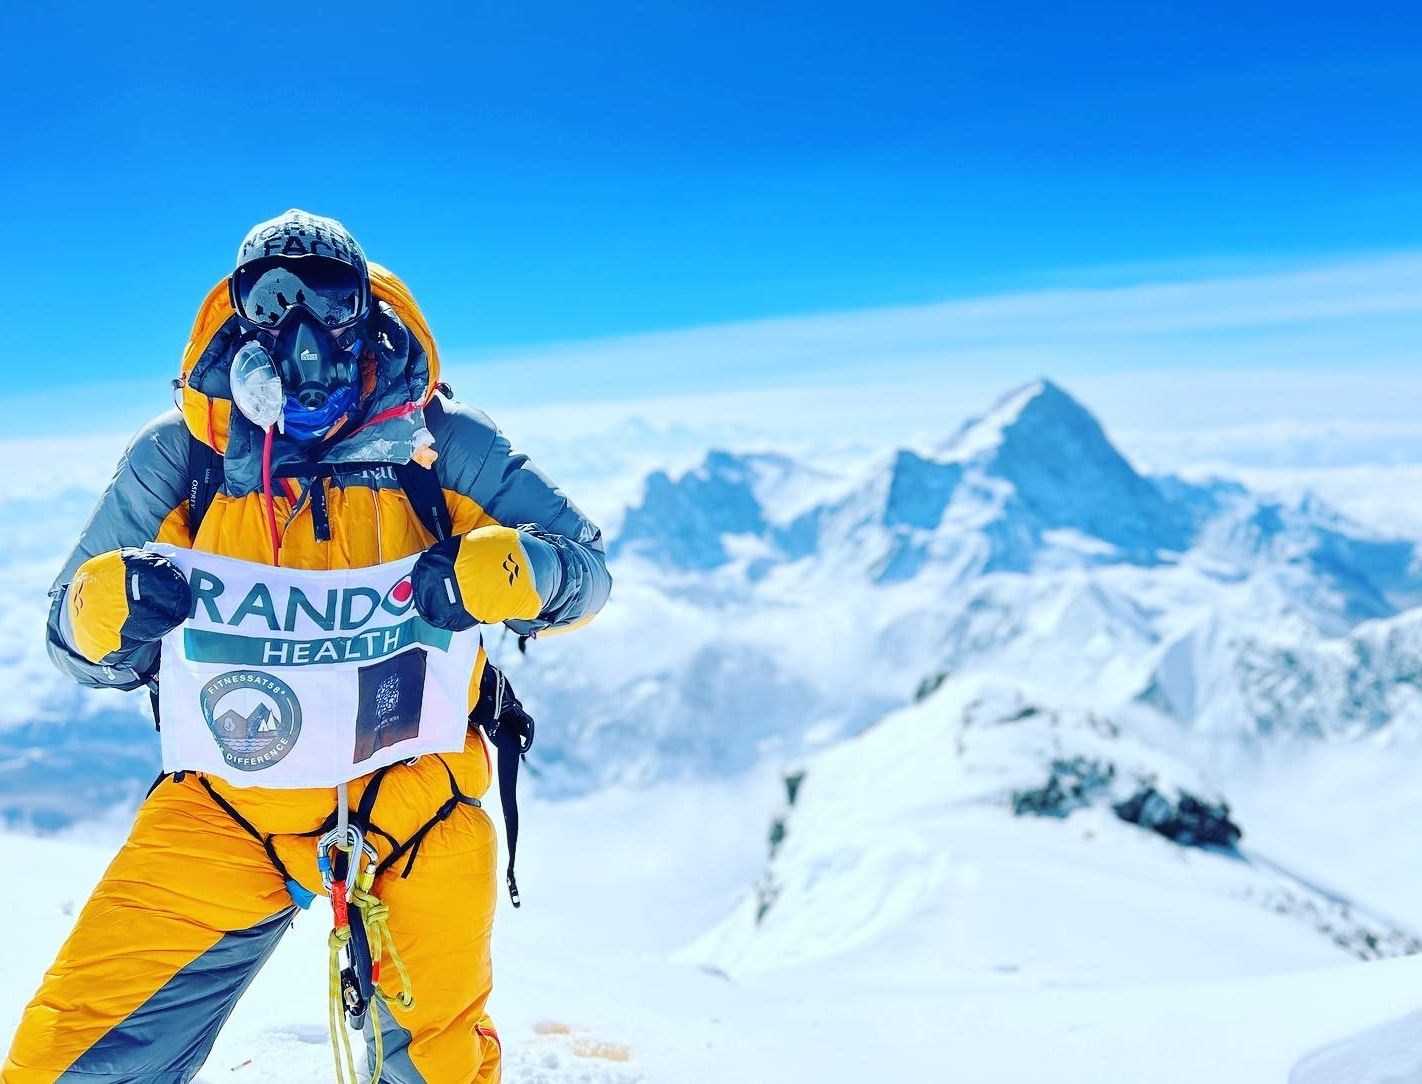 Sam Cairns will be holding a talk at Loch Insh Watersports Centre about the challenges of his Everest experience.